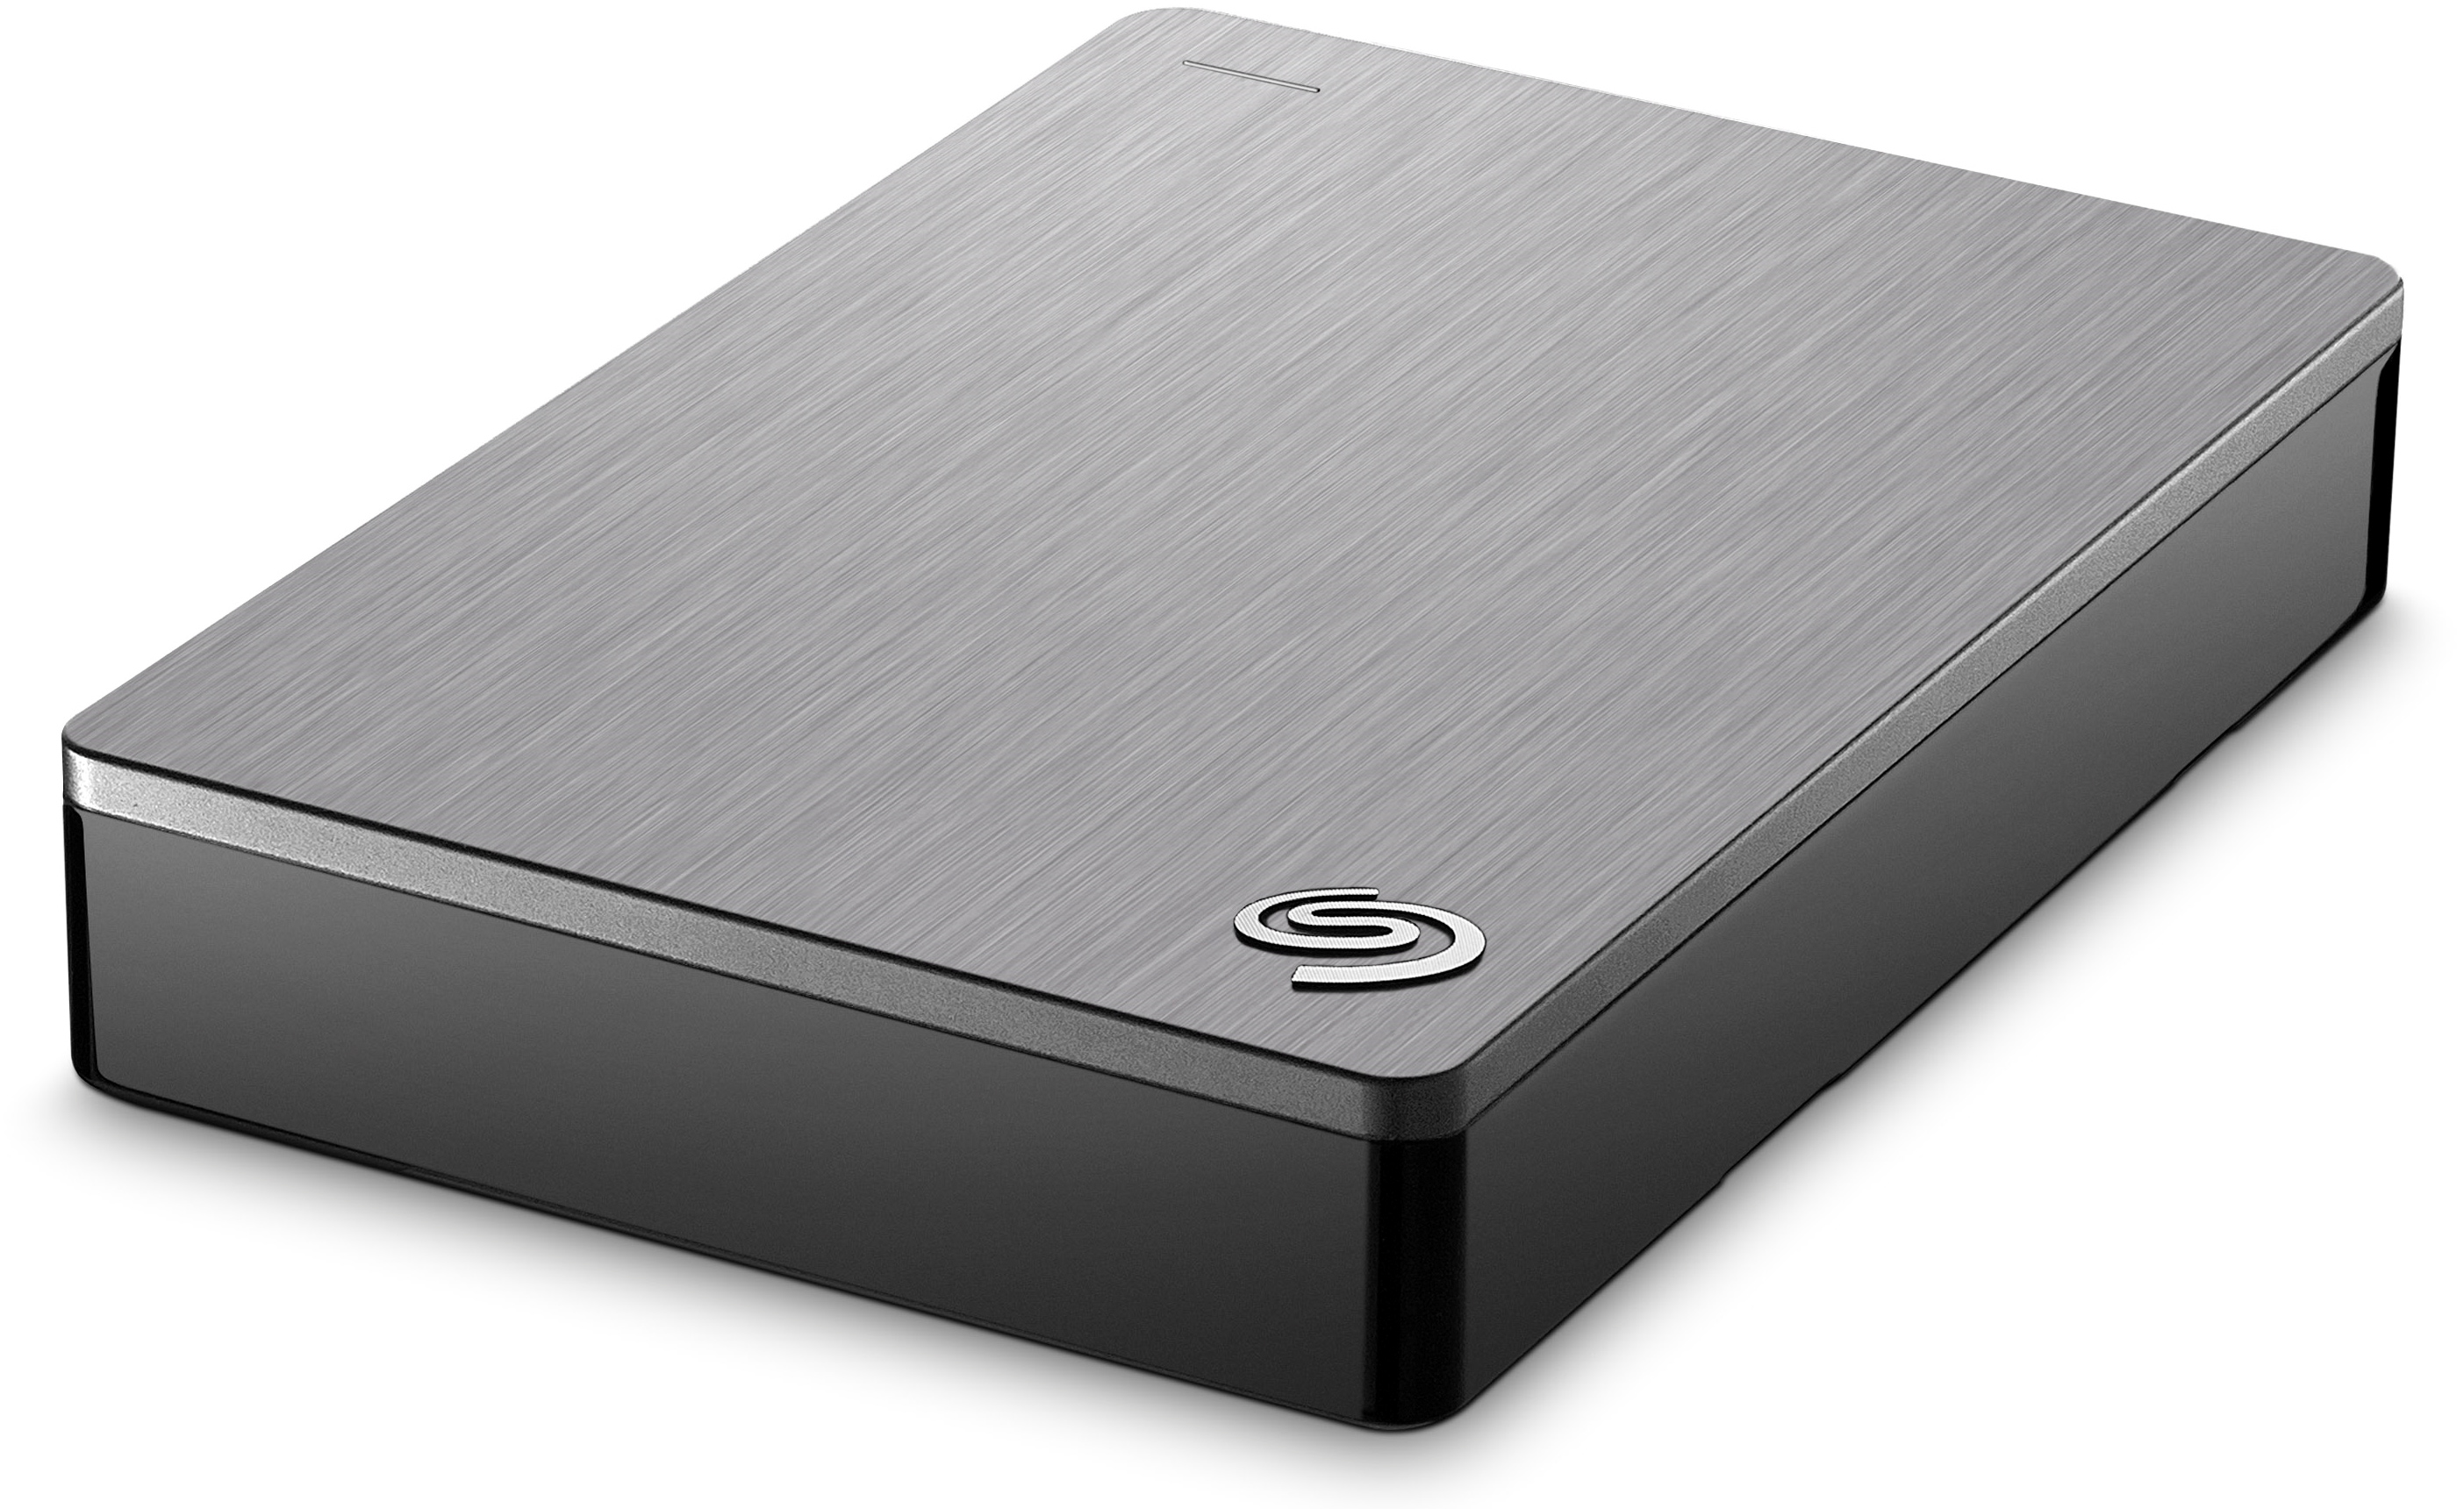 Seagate Introduces Backup Plus Portable 5 TB The Largest